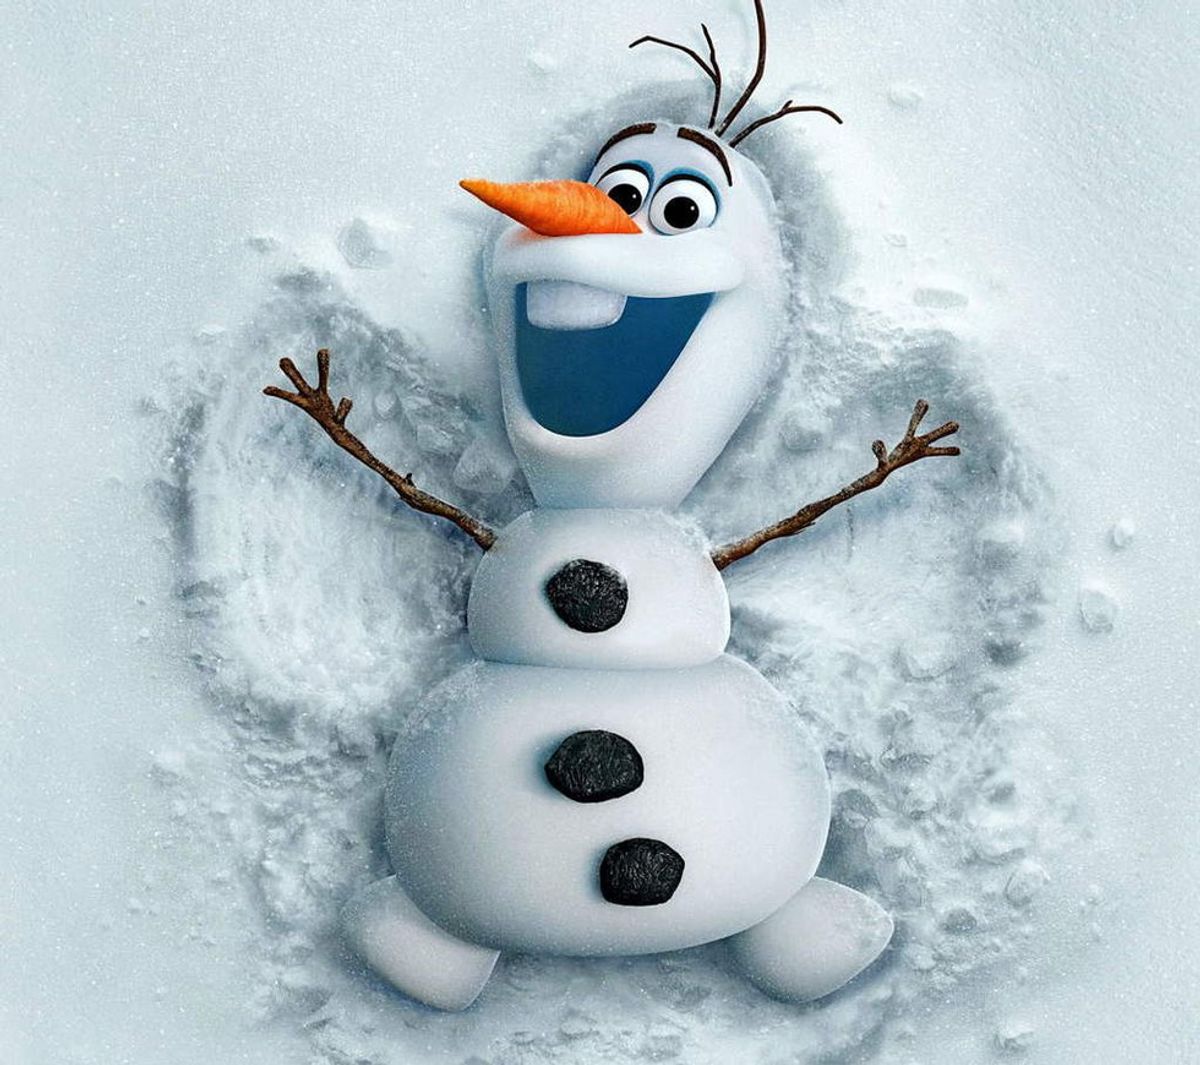 7 Activities To Look Forward To On A Snow Day